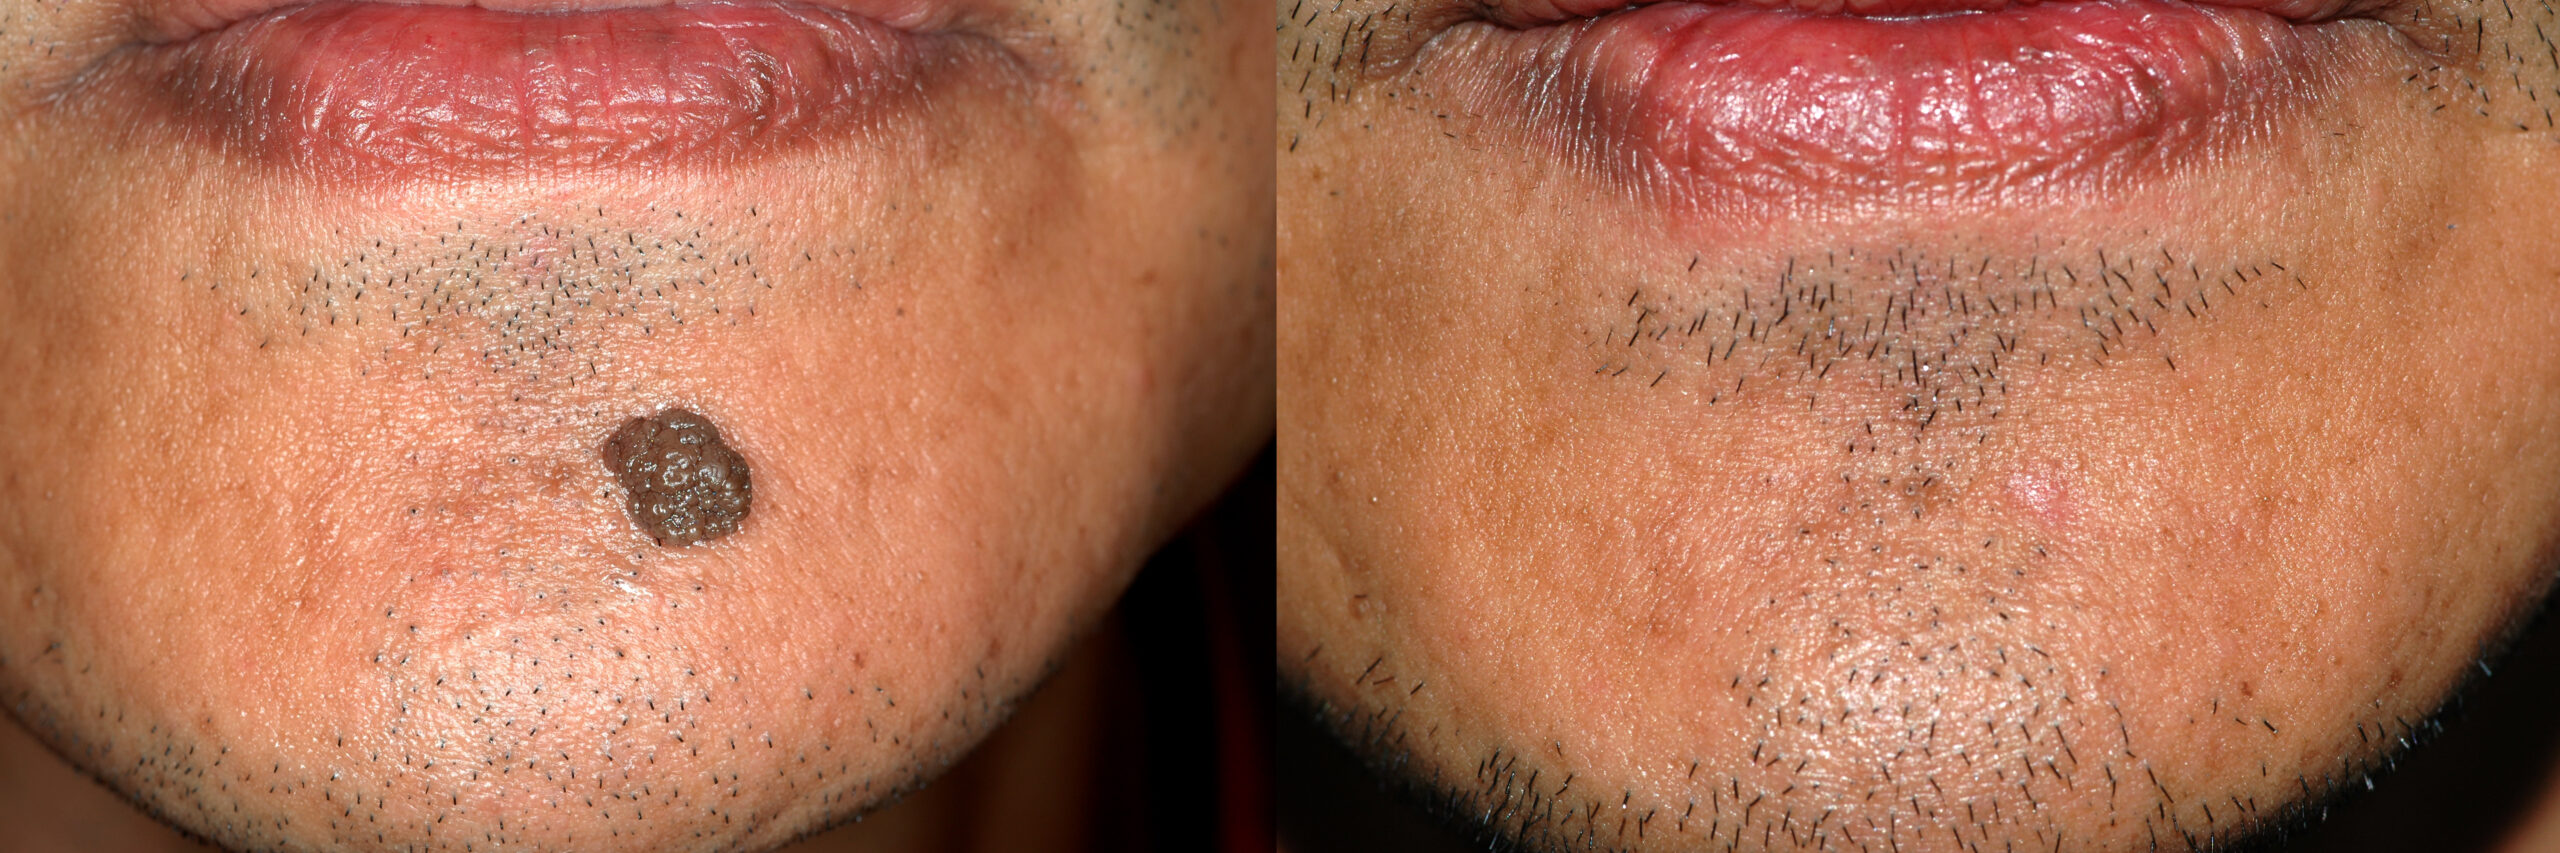 Raul pre RF mole removal Collage Hi Res scaled